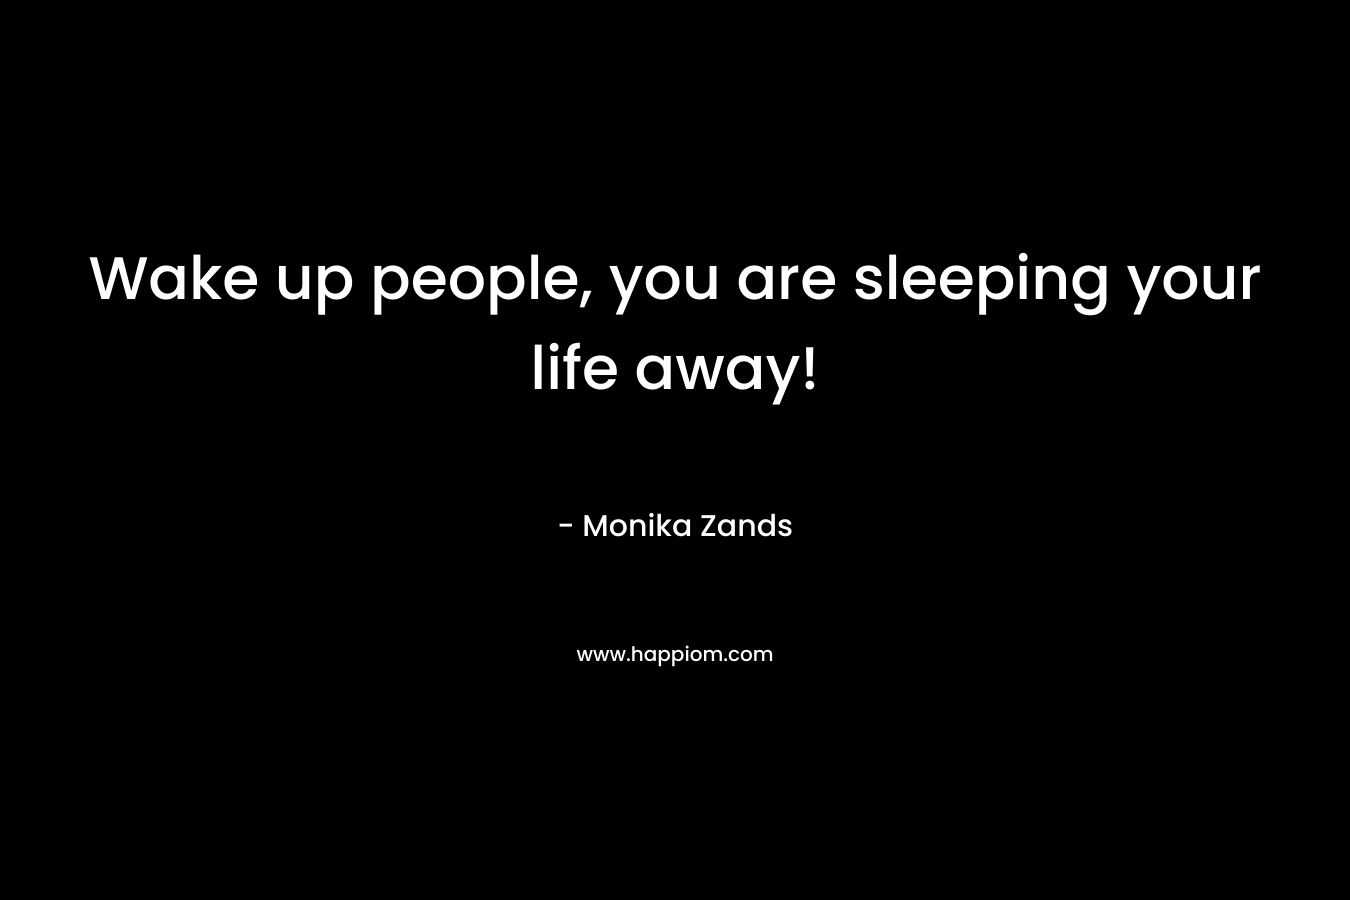 Wake up people, you are sleeping your life away!